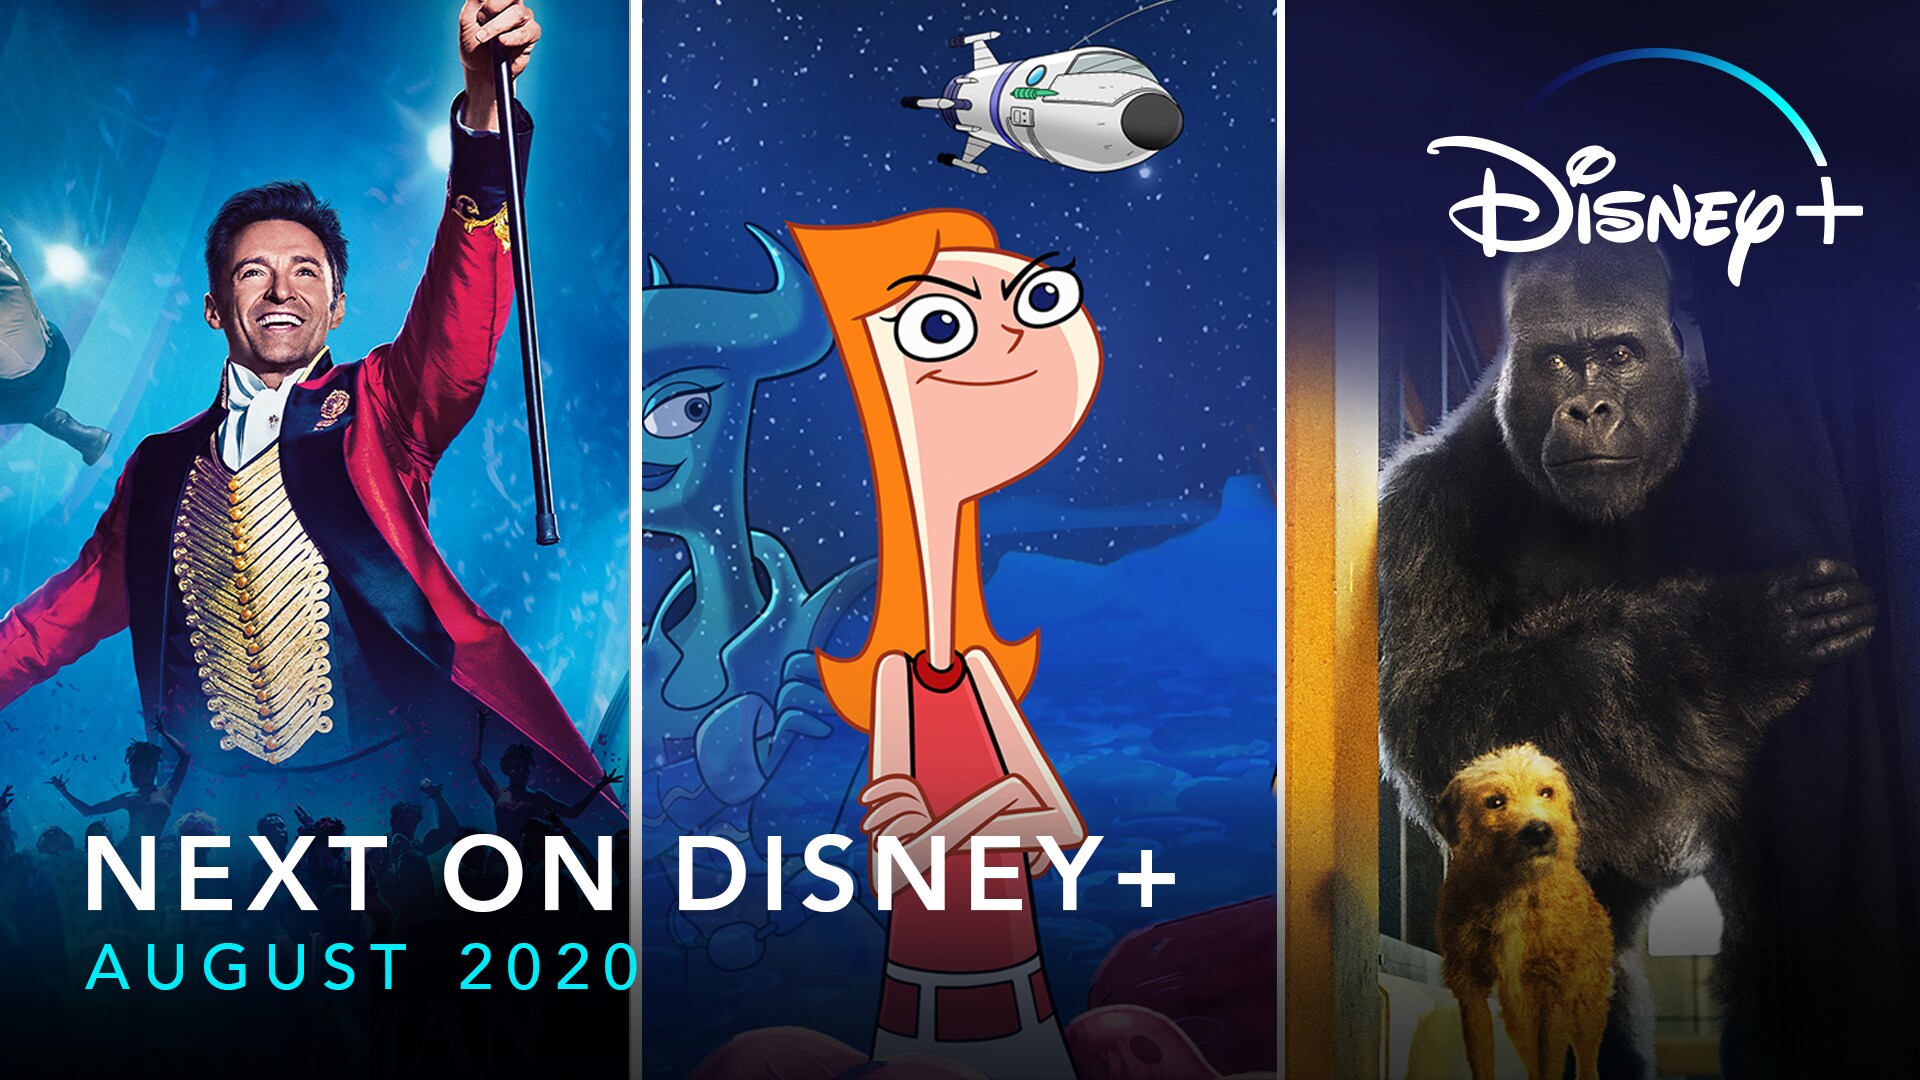 Everything New on Disney+ in August